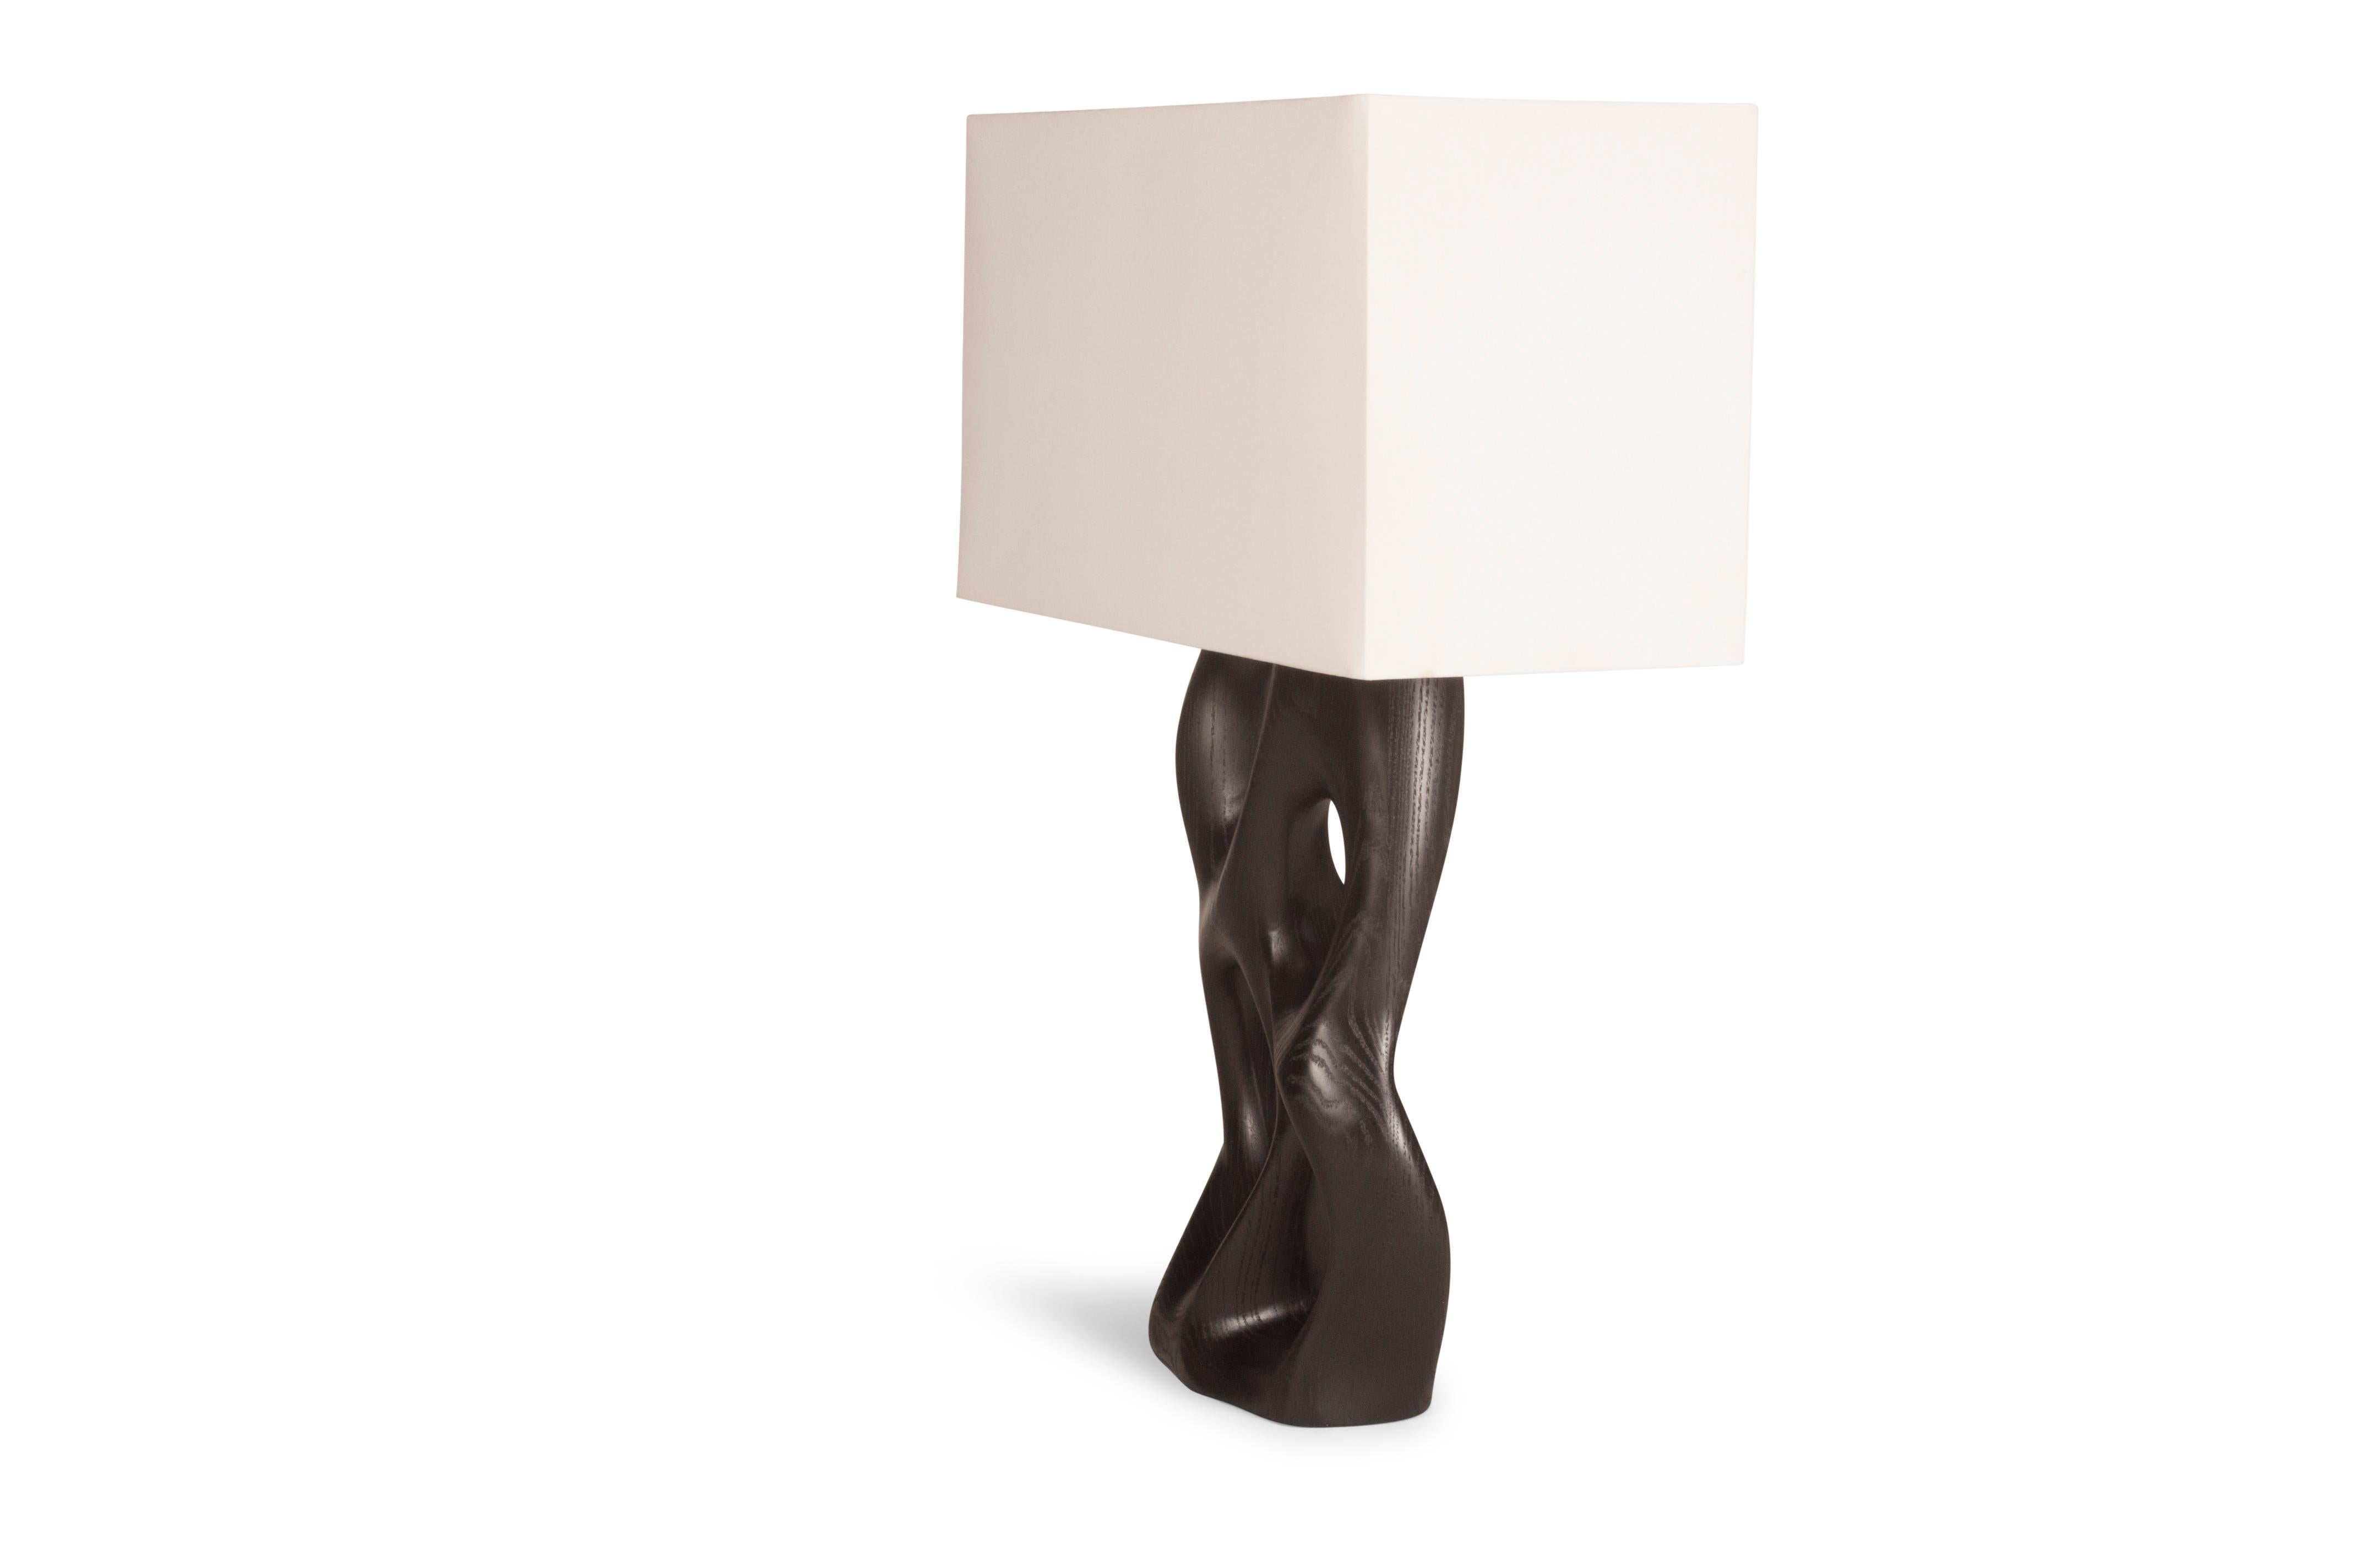 Carved Amorph Loop Table Lamp in Ebony Stain on Ash wood with Ivory Silk Shade For Sale